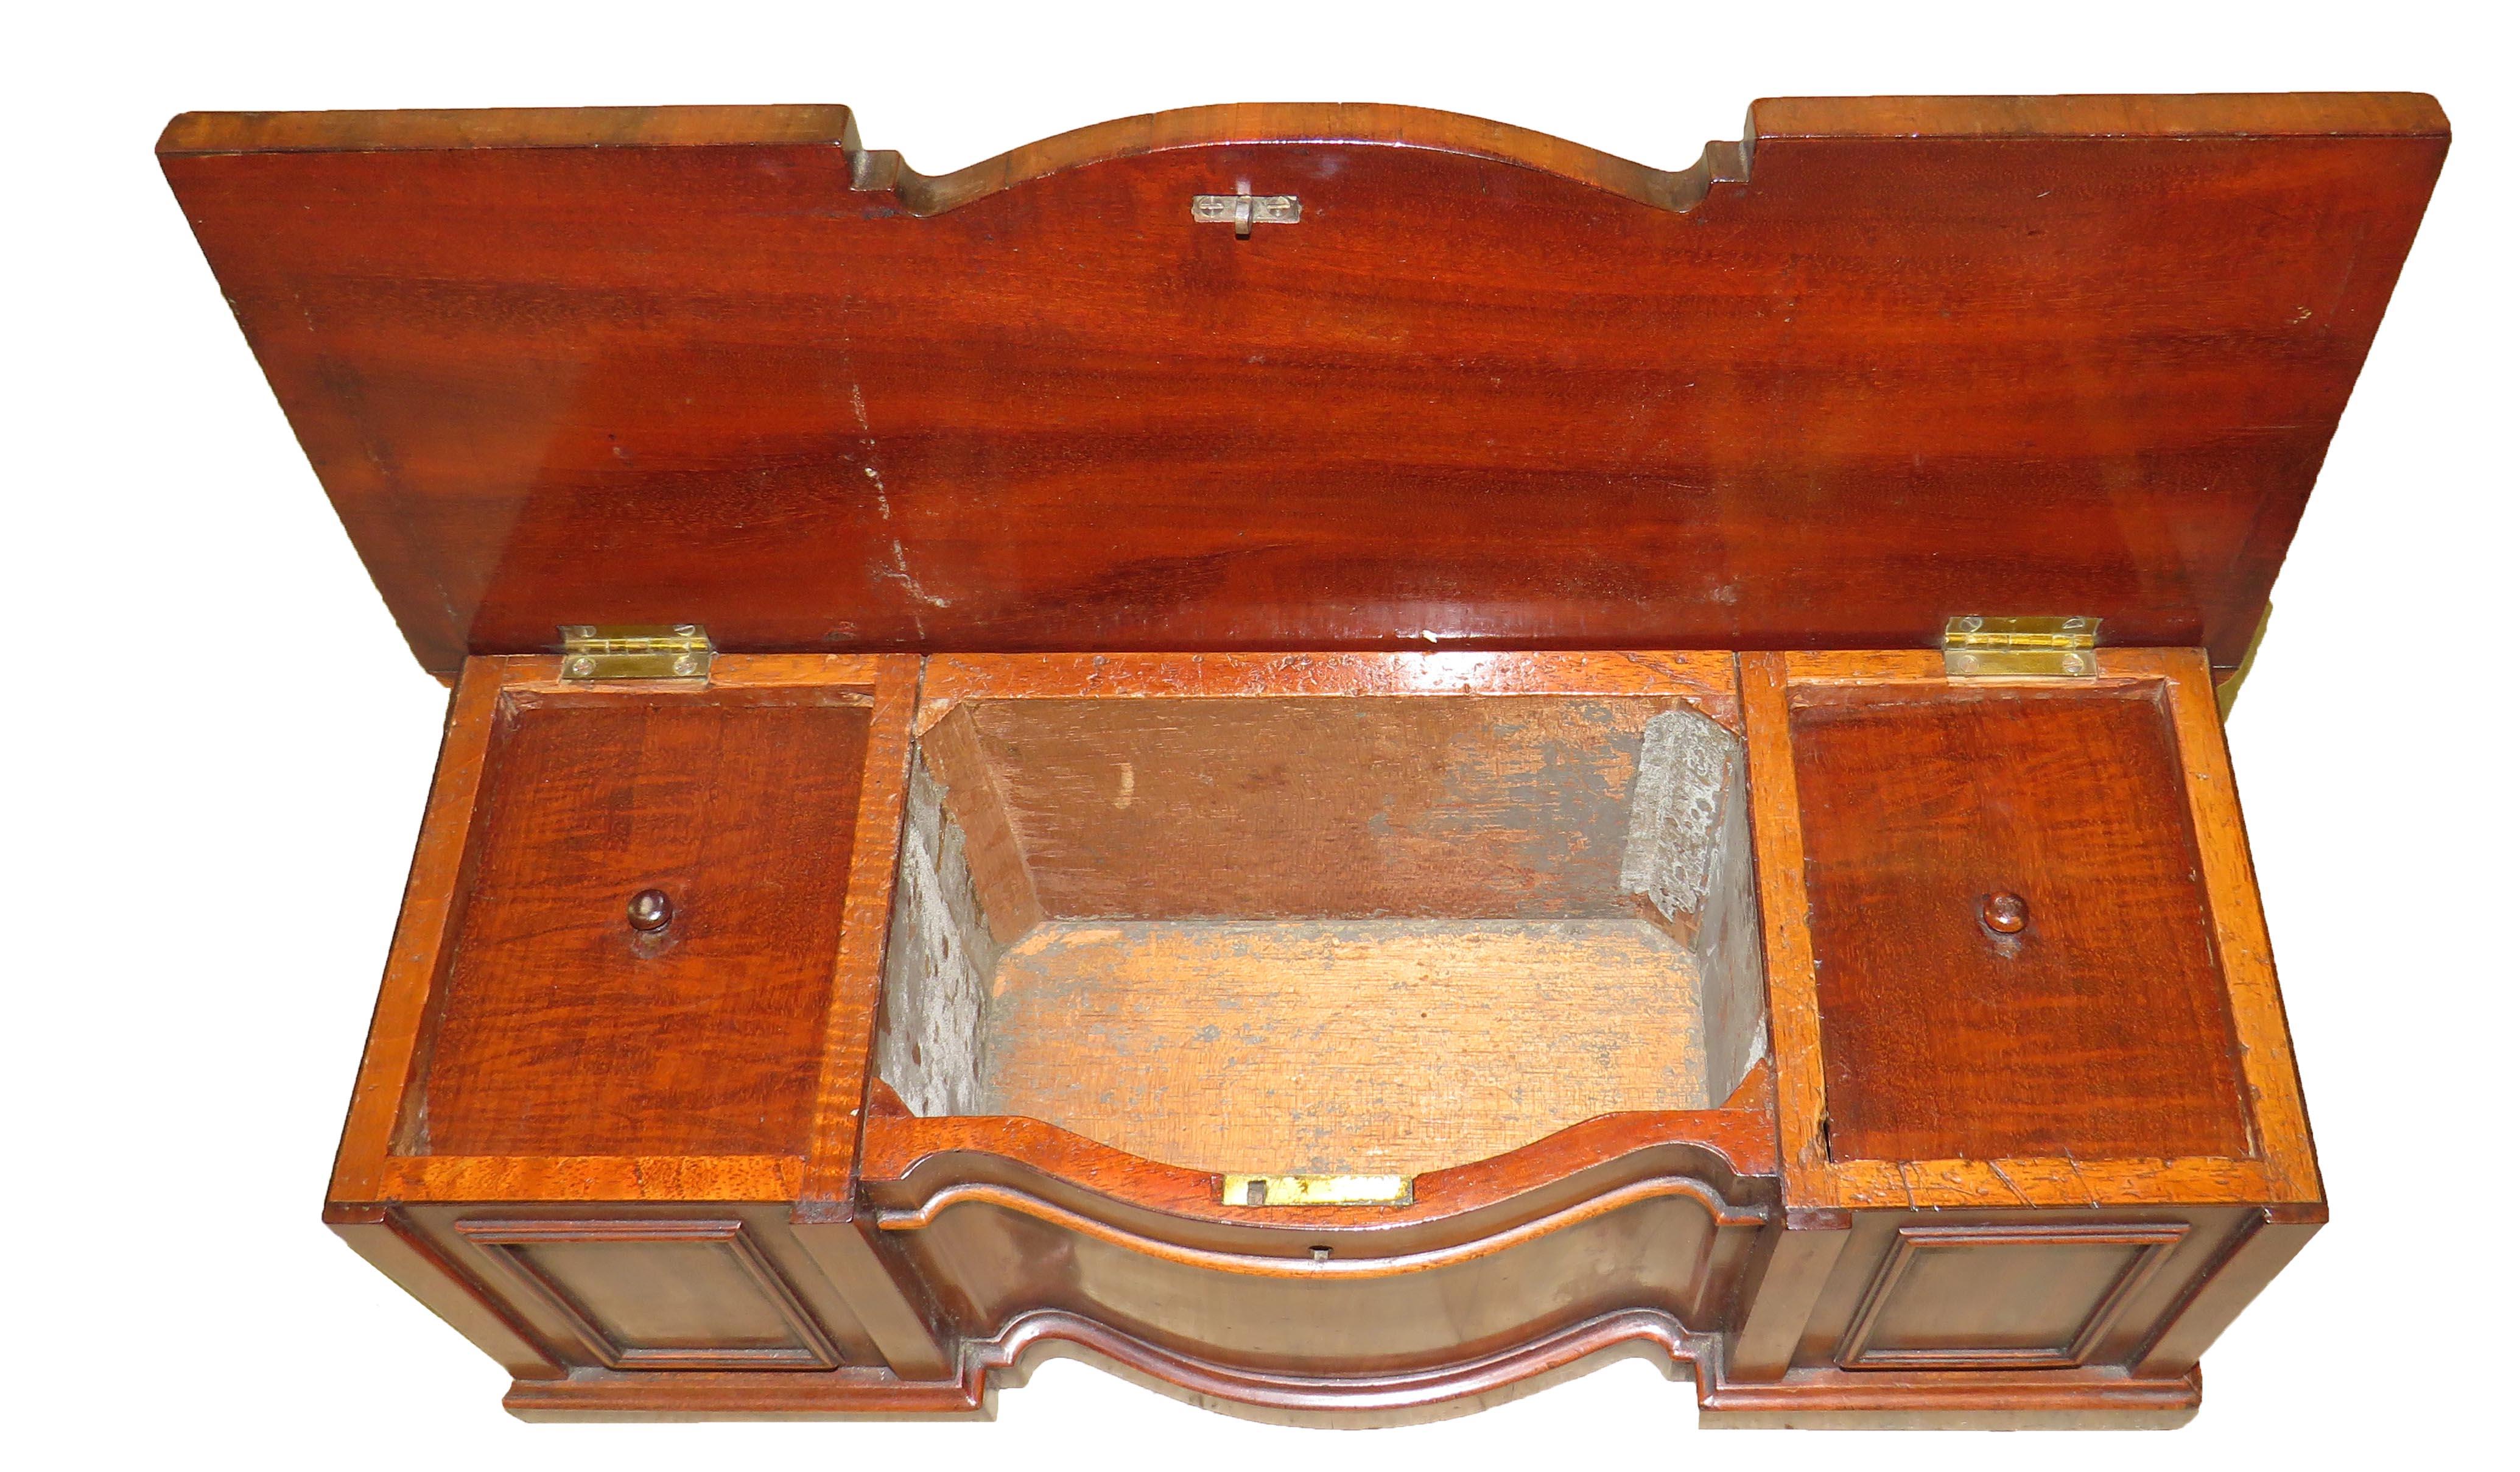 A rare and very good quality English Regency period
mahogany tea caddy in the form of a miniature serpentine
sideboard with lift up hinged lid and carved decoration

(This unusual piece is a combination of both a piece of
miniature furniture